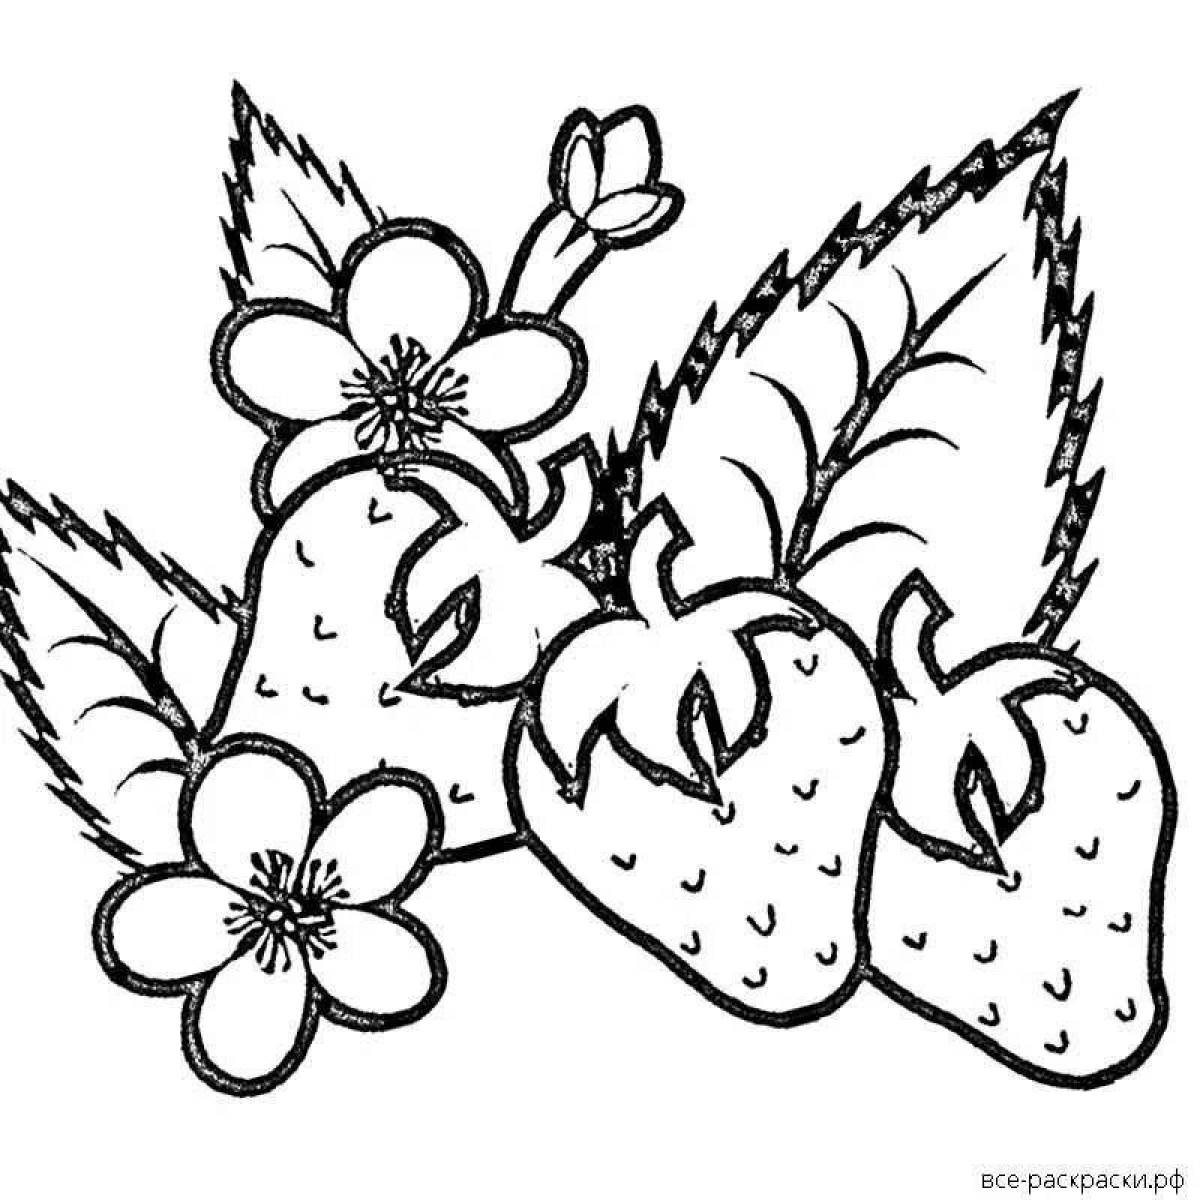 Coloring-imagination coloring page what can